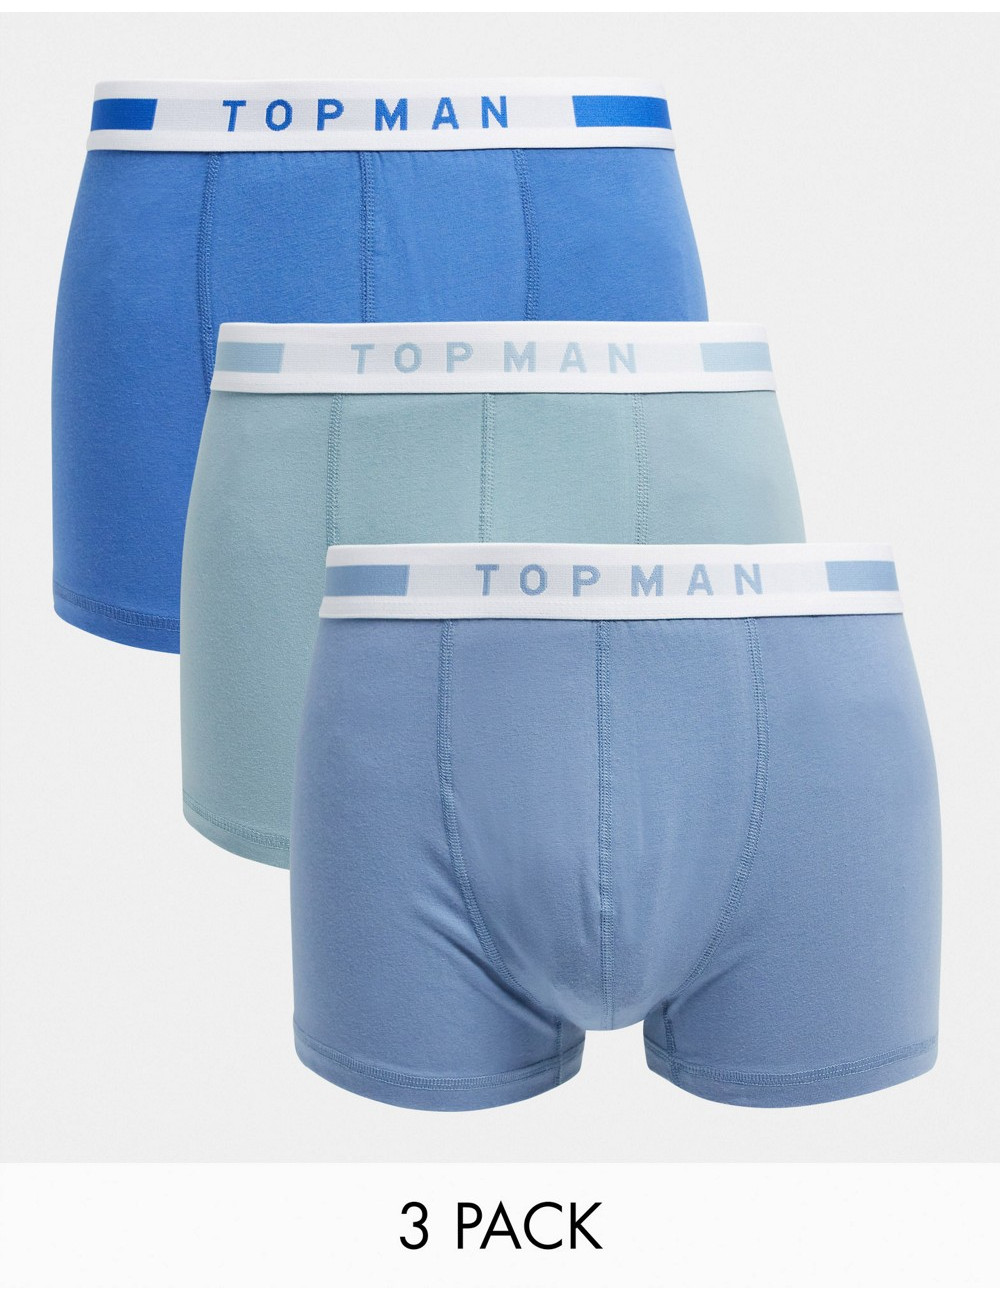 Topman trunks in shades of...